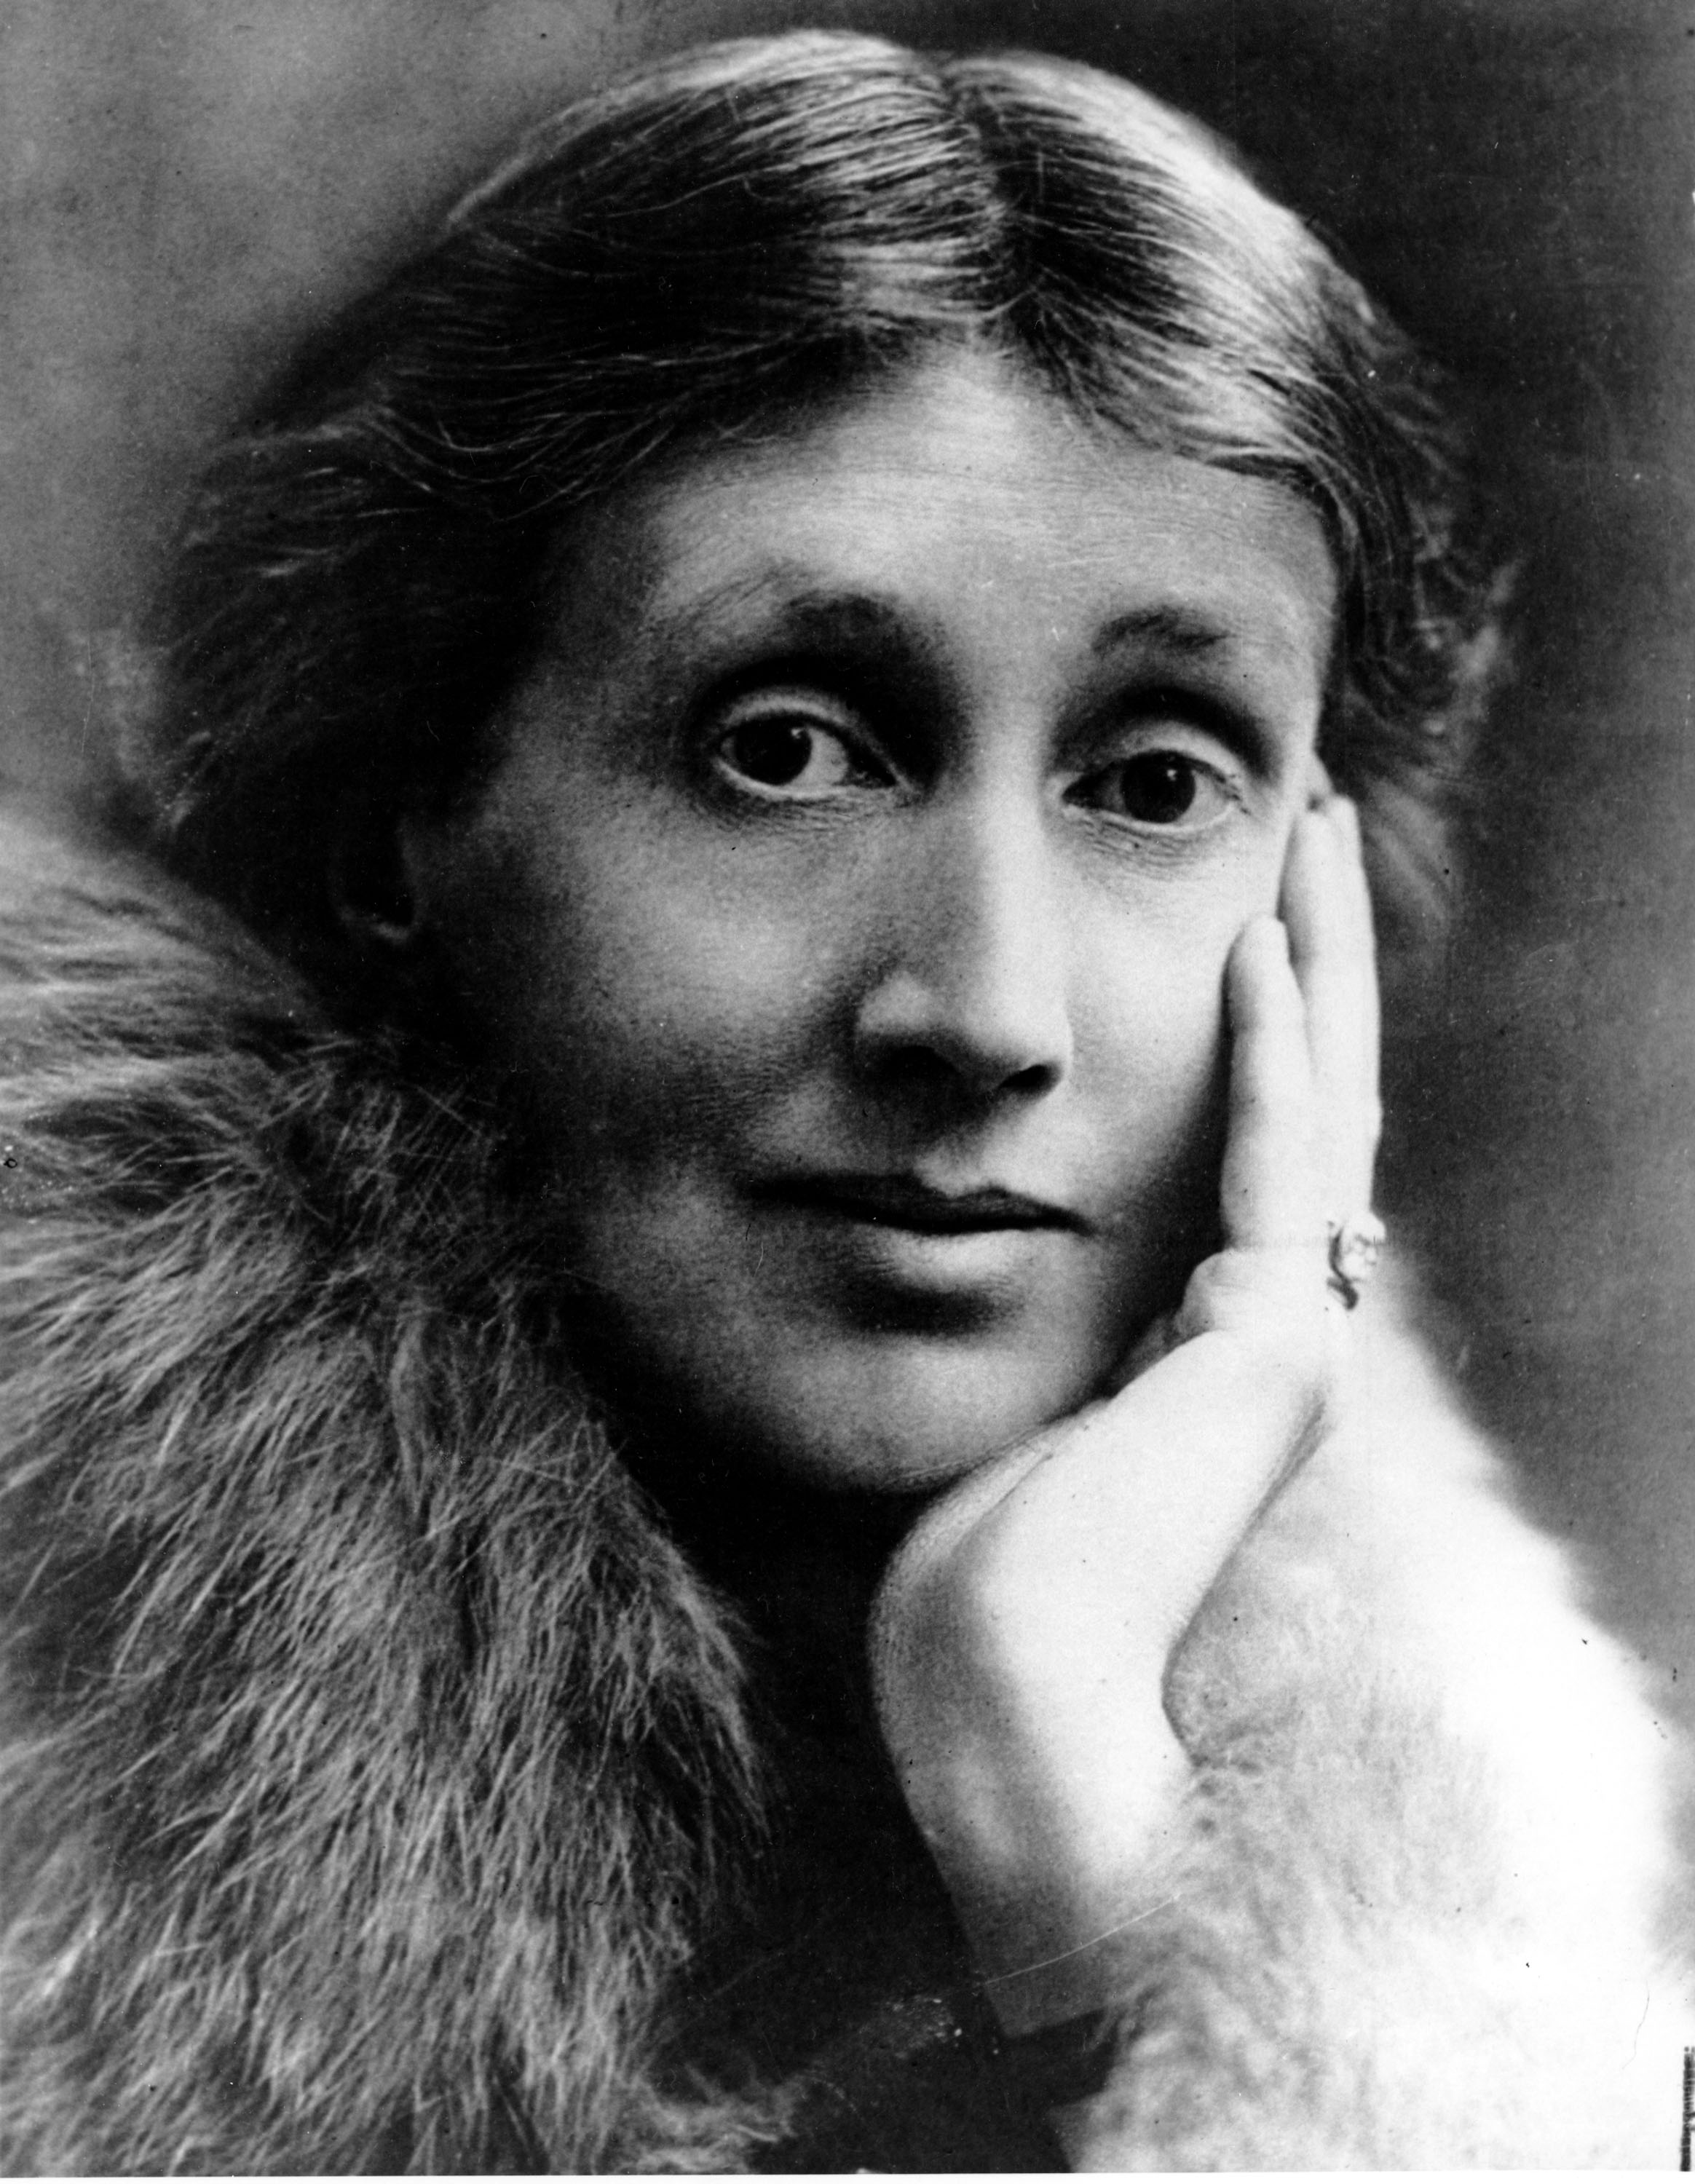 http://virginiawoolfblog.com/virginia-woolf-had-teeth-pulled-to-cure-her-mental-illness/